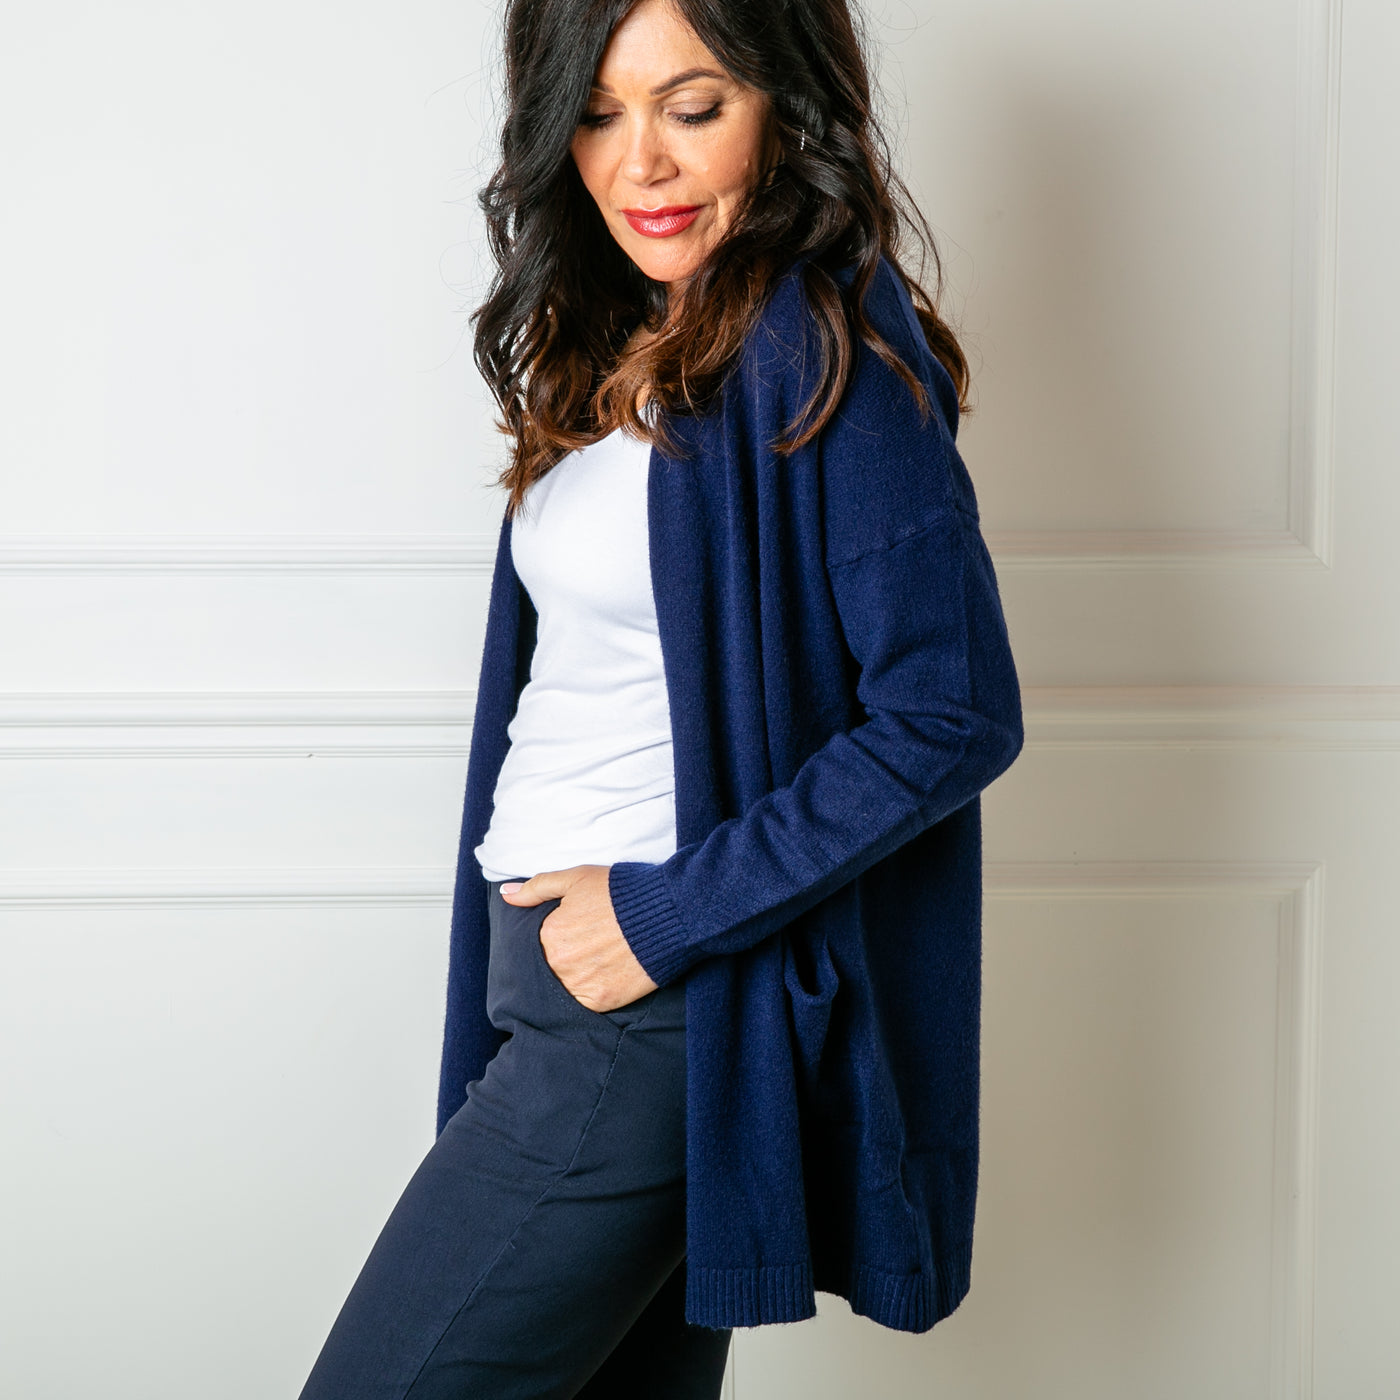 The navy blue Essentials Knit Cardigan with ribbed detailing around the sleeve cuffs and bottom hemline